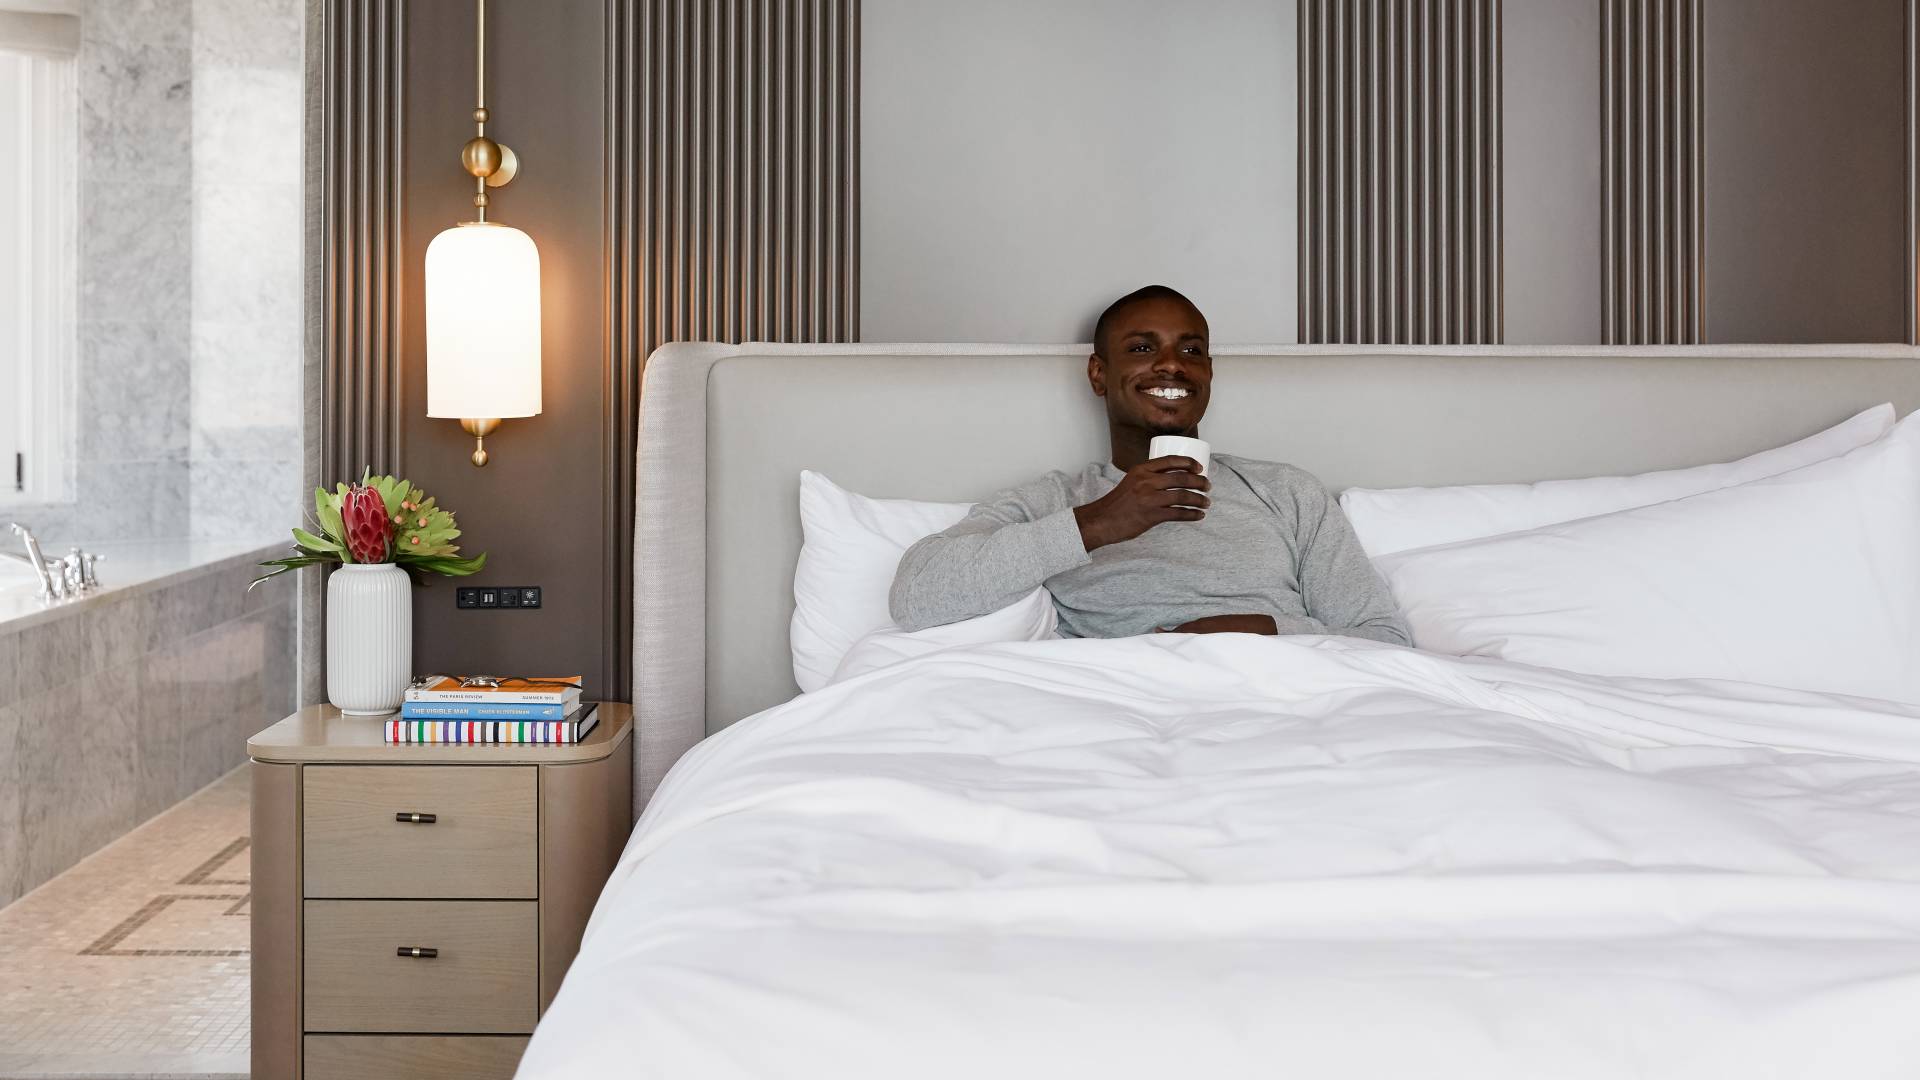 Man lying in bed drinking cup of coffee